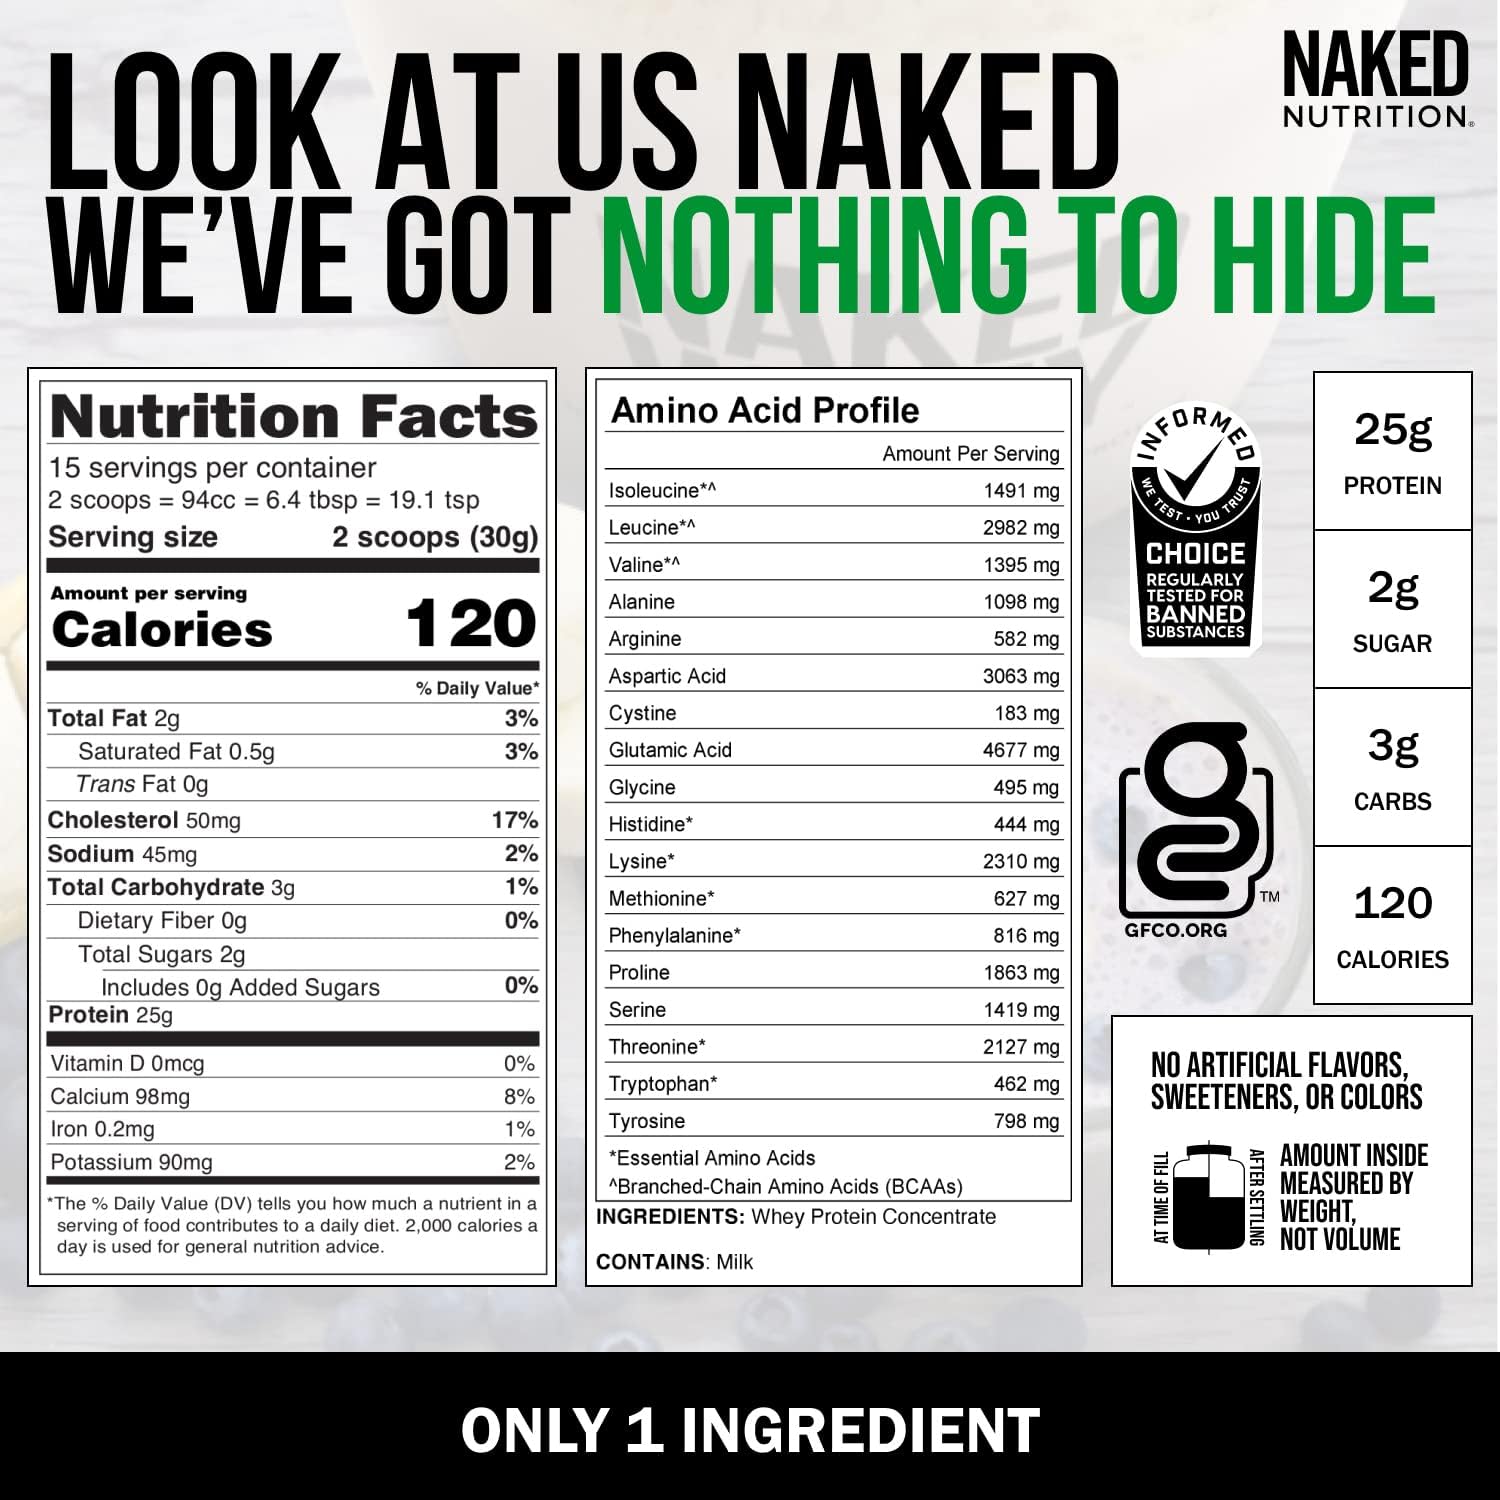 Naked Nutrition Naked Whey 1Lb - Only 1 Ingredient, Grass Fed Whey Protein Powder, Undenatured, No Gmos, No Soy, Gluten Free, Stimulate Growth, Enhance Recovery - 15 Servings : Health & Household